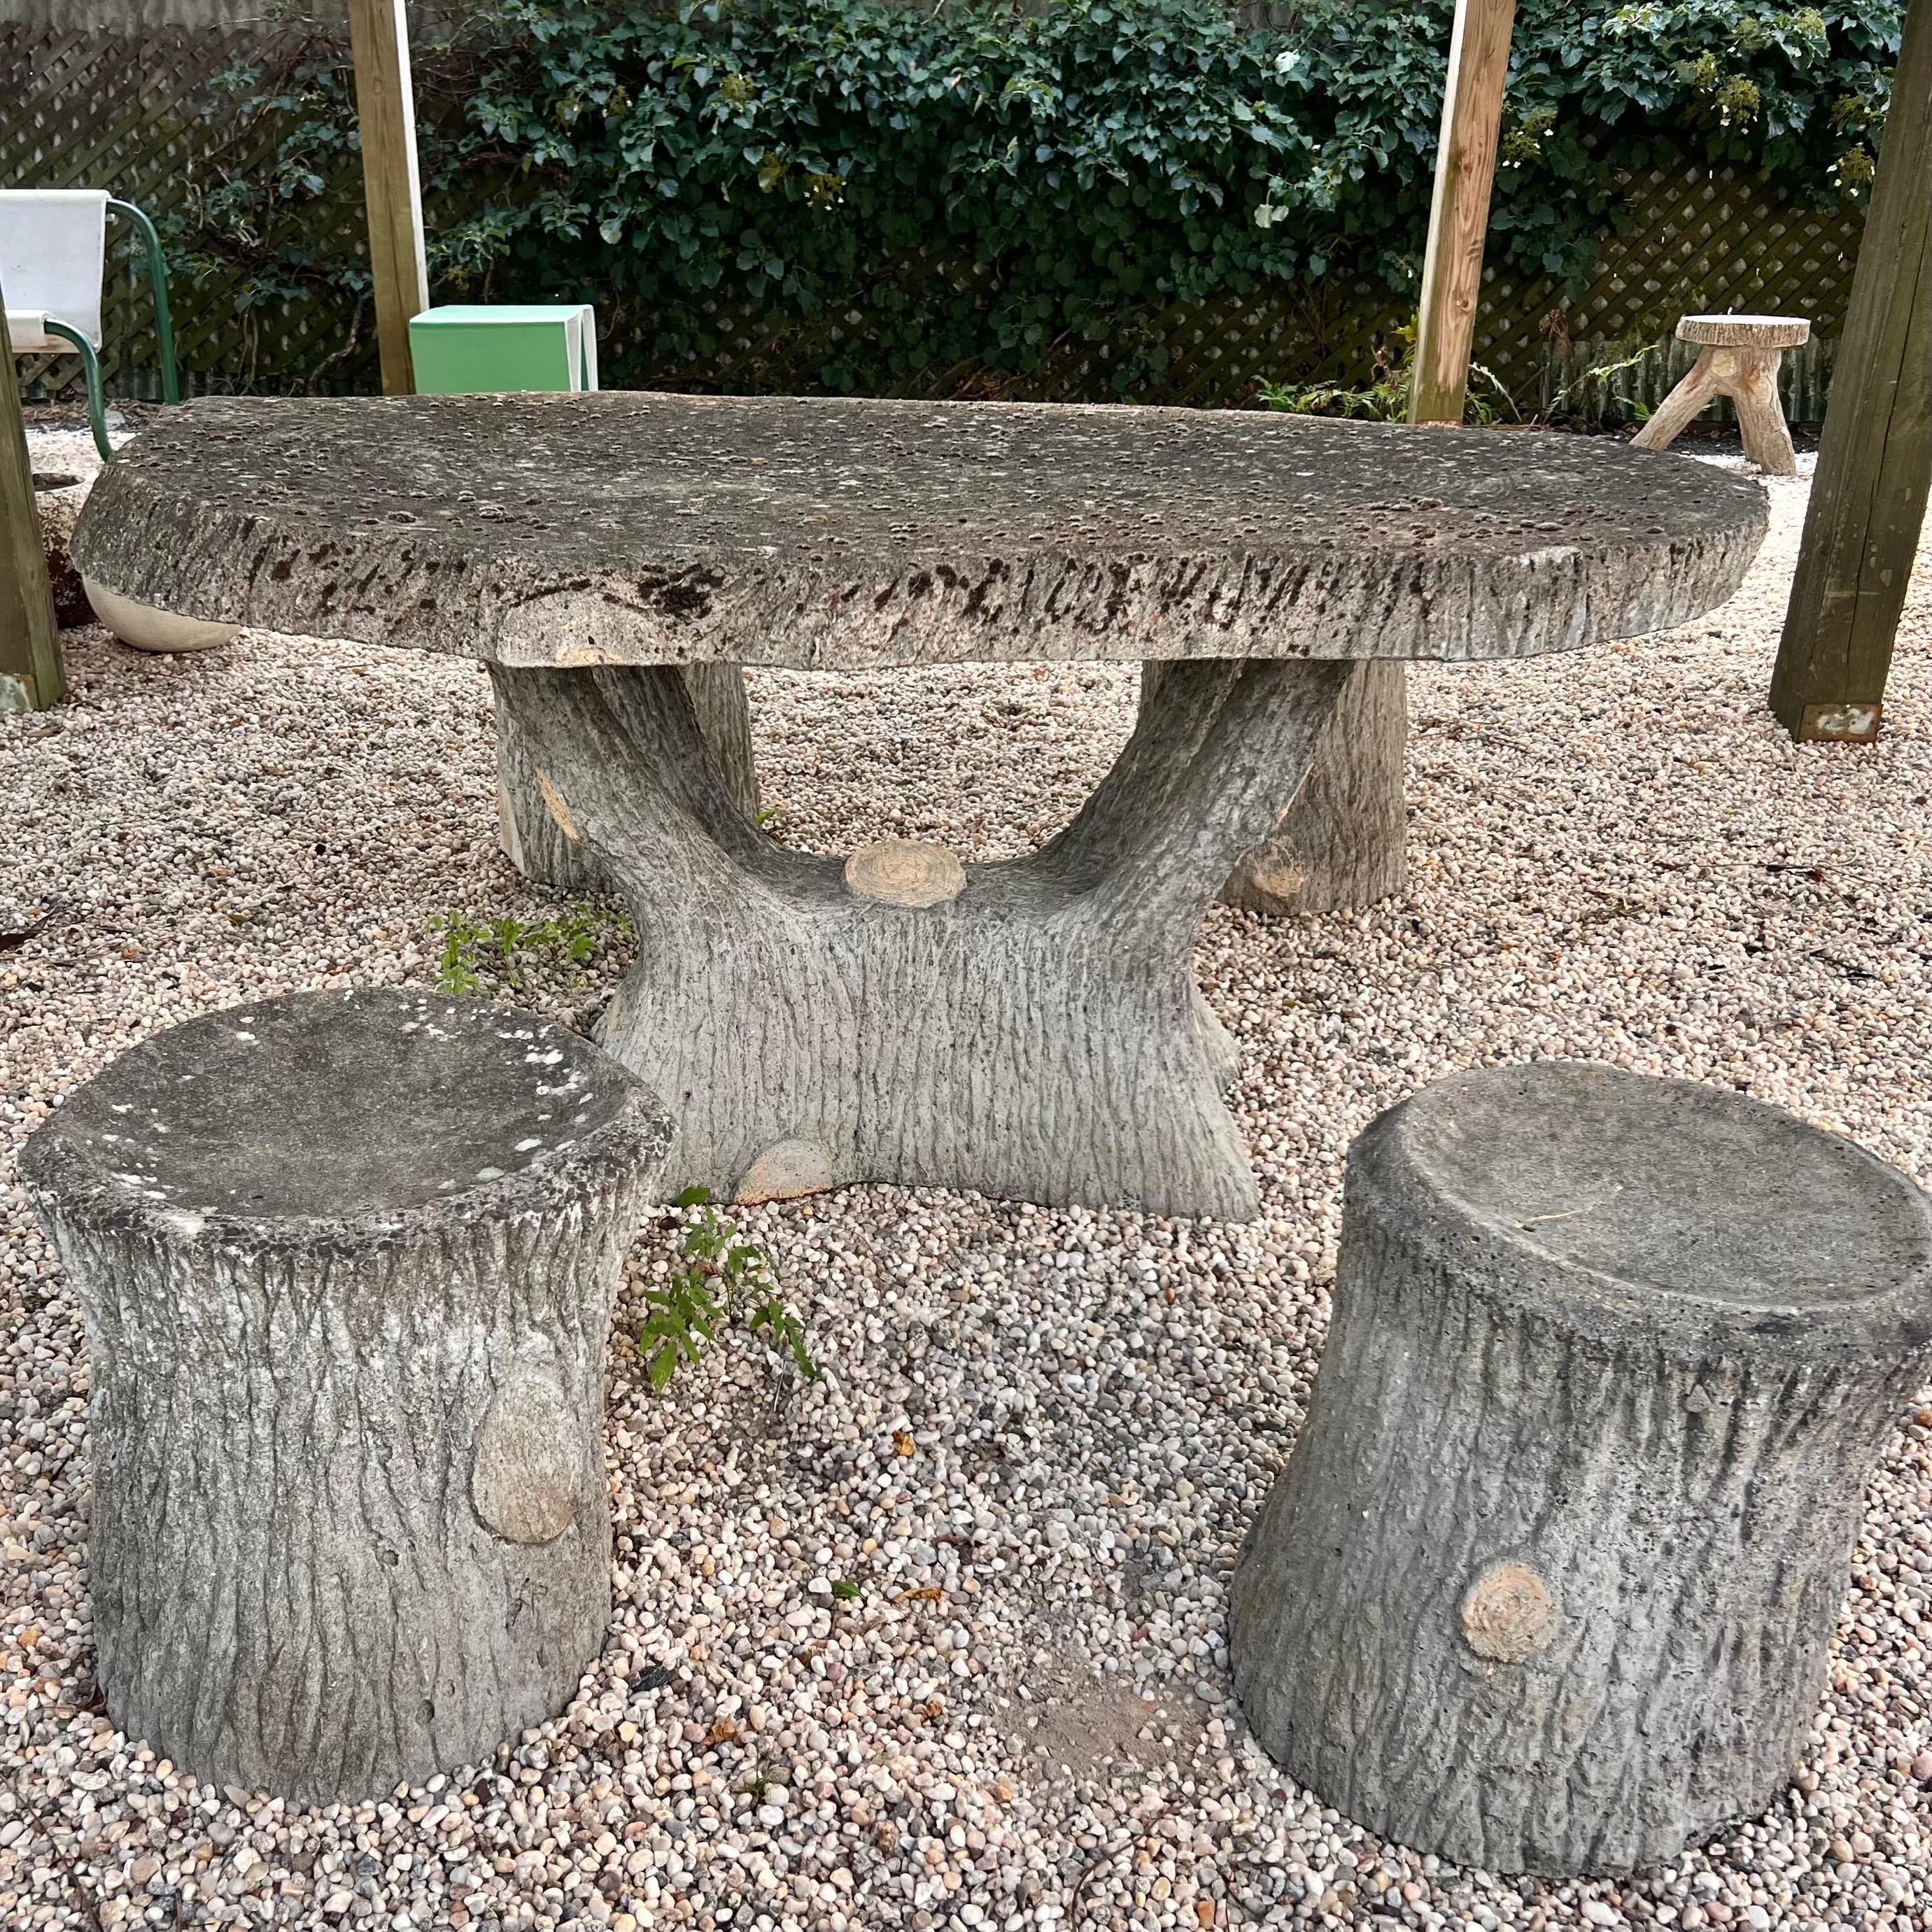 Substantial faux-bois concrete table and stools from France, made in the 1960s. 4 stools and one table included in this set. Legs and table base resemble tree trunks and branches. Oversized tabletop covered in lichen, moss and patina sits atop the